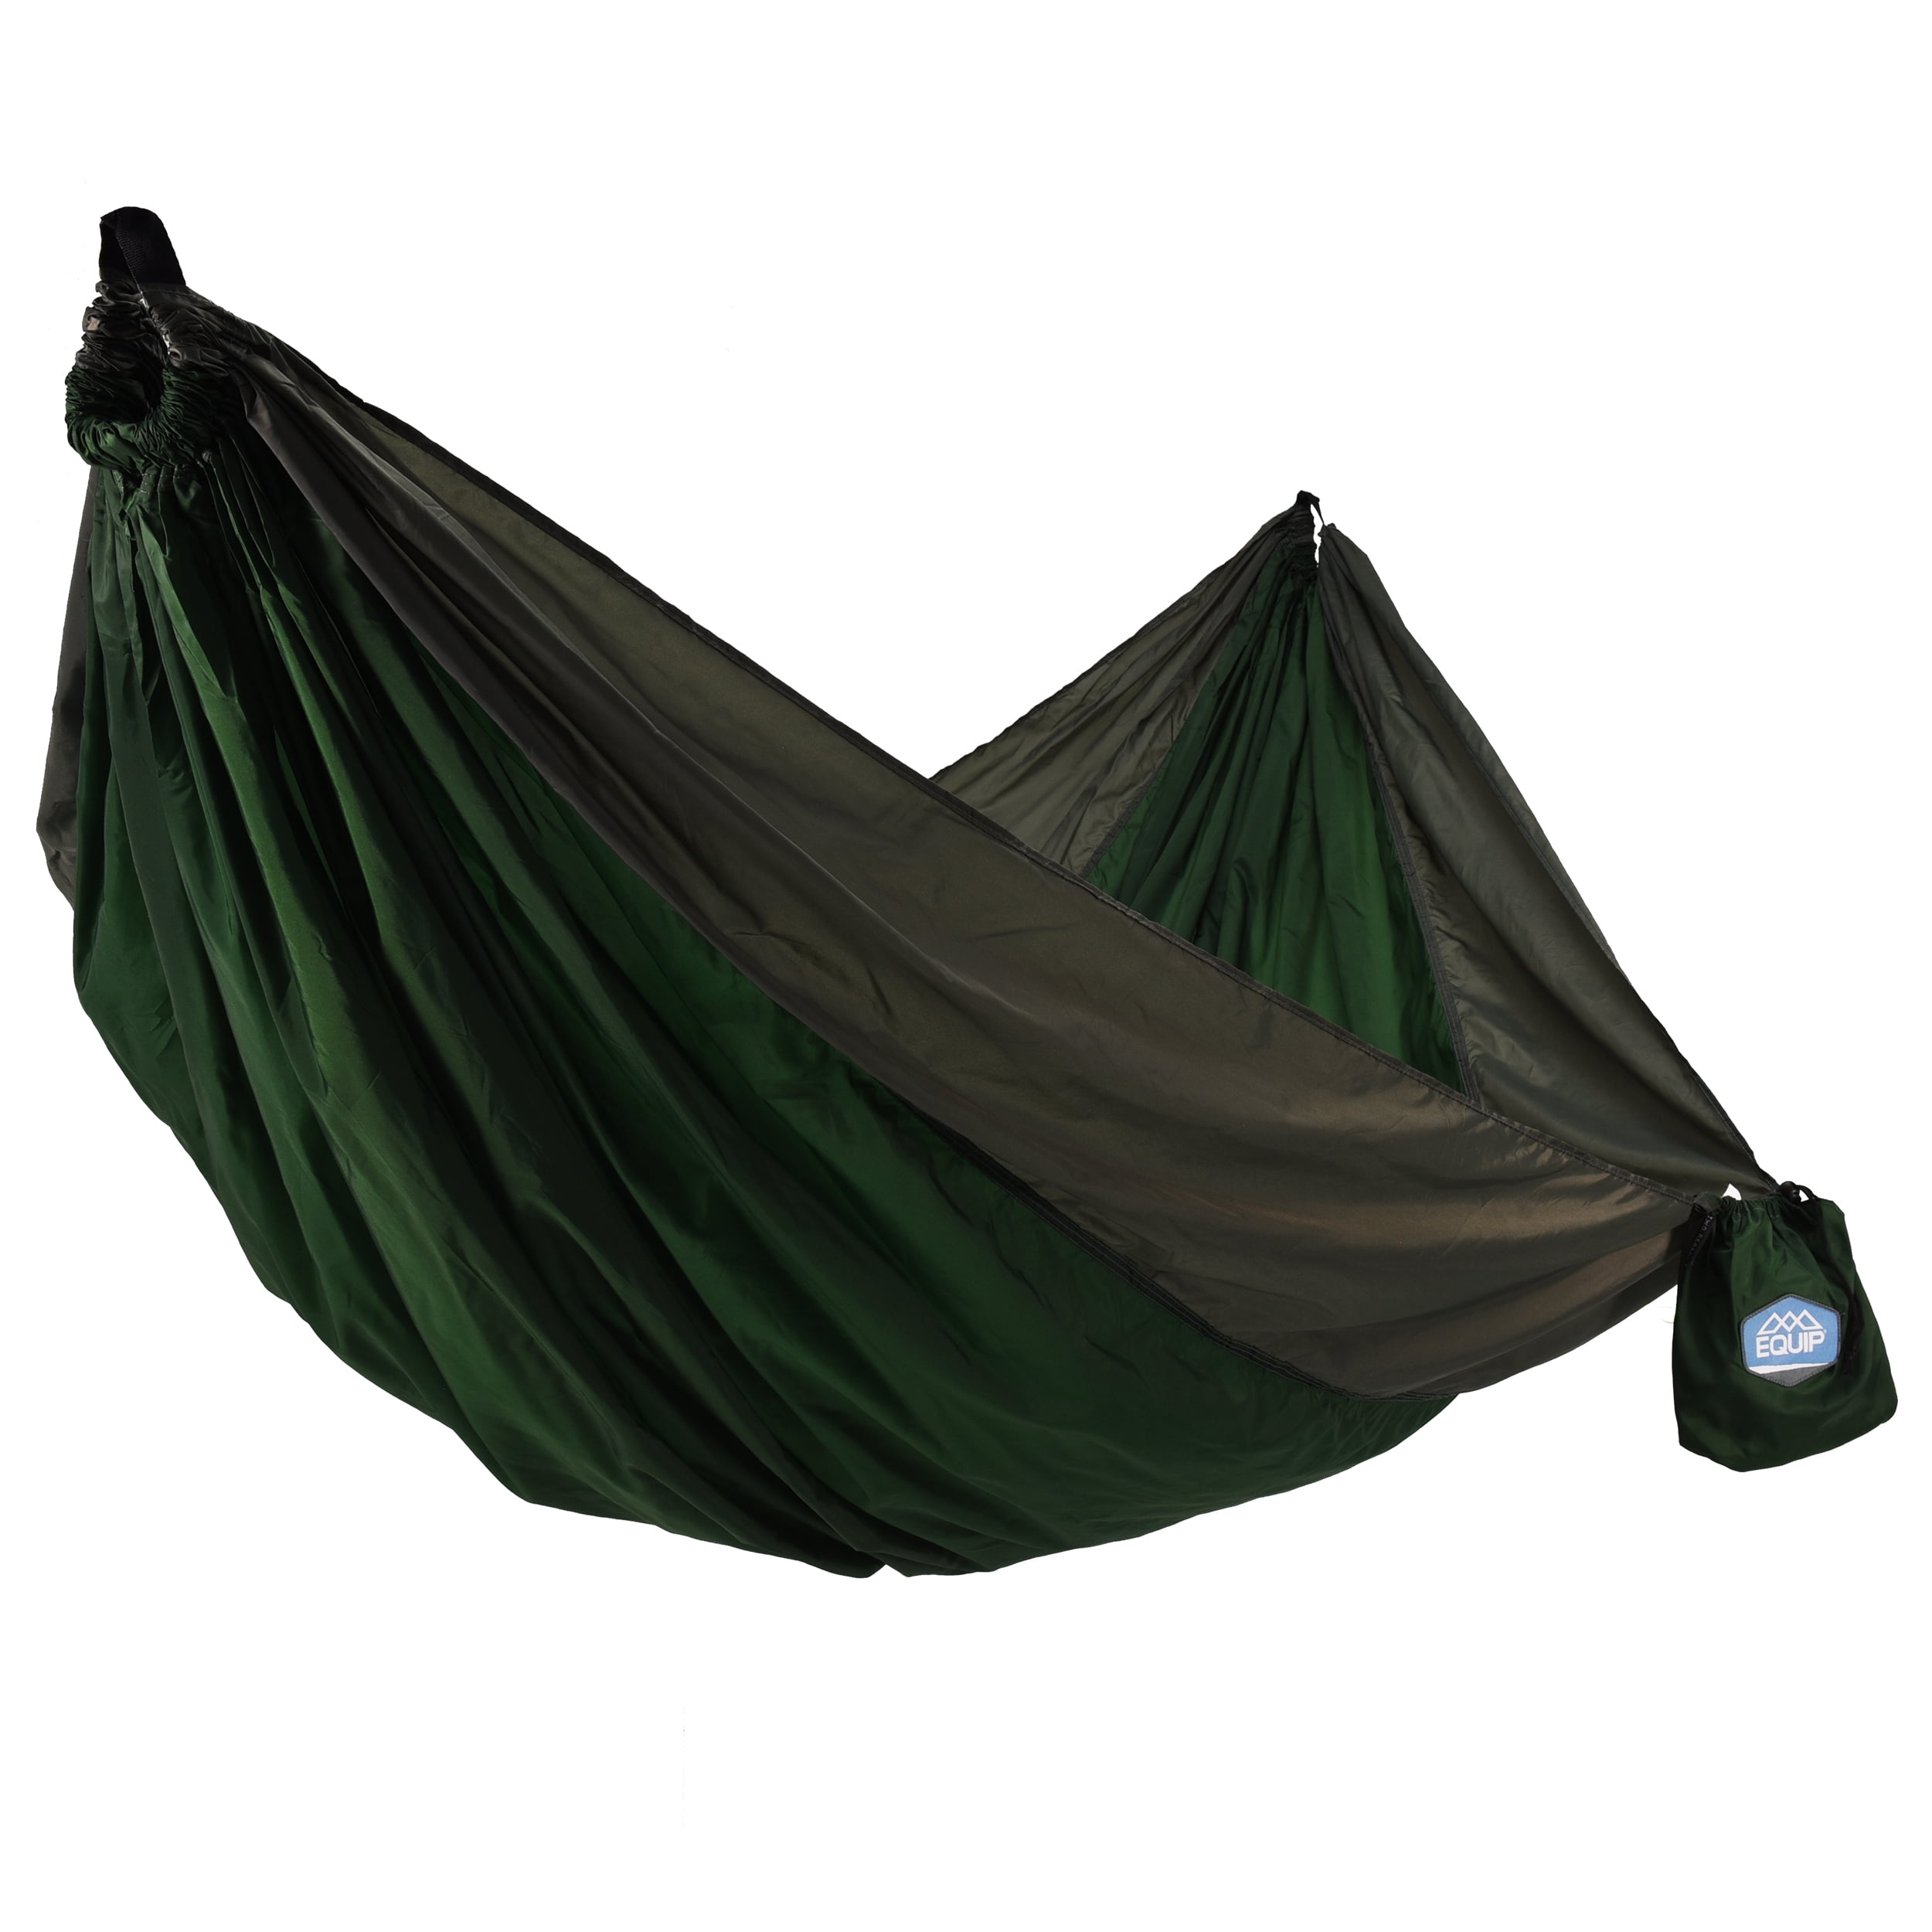 with Additional Straps and Hardware New Kid Size Green Hammock 